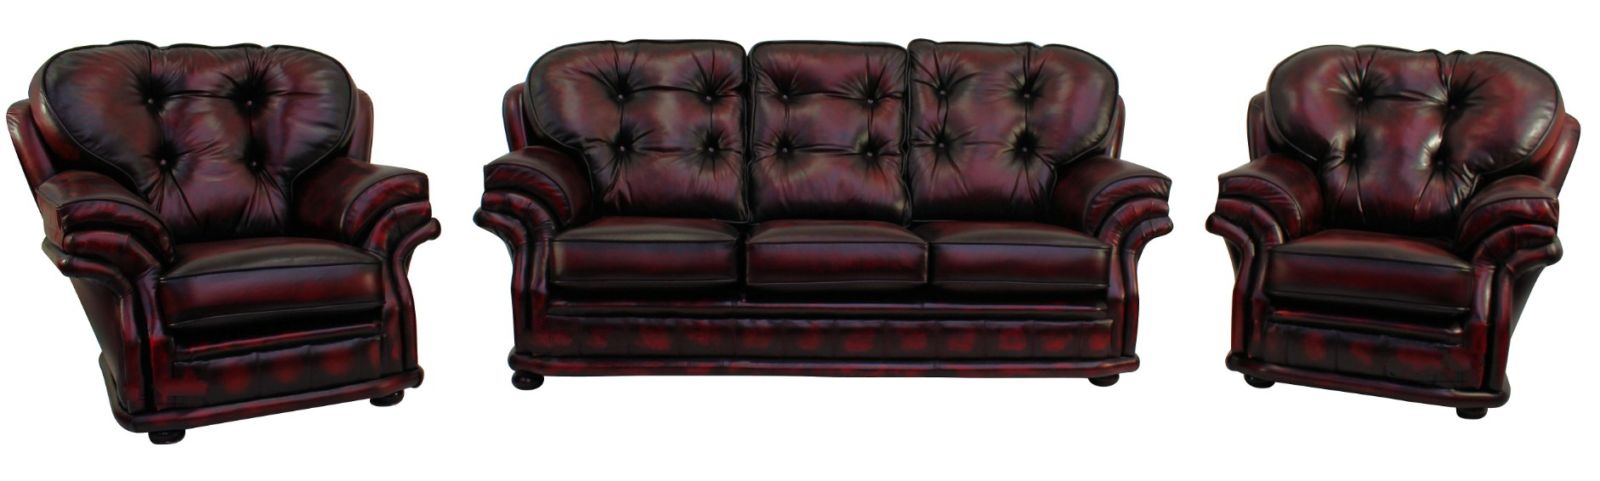 Product photograph of Chesterfield 3 1 1 Seater Antique Oxblood Red Leather Sofa Suite In Knightsbr Idge Style from Chesterfield Sofas.